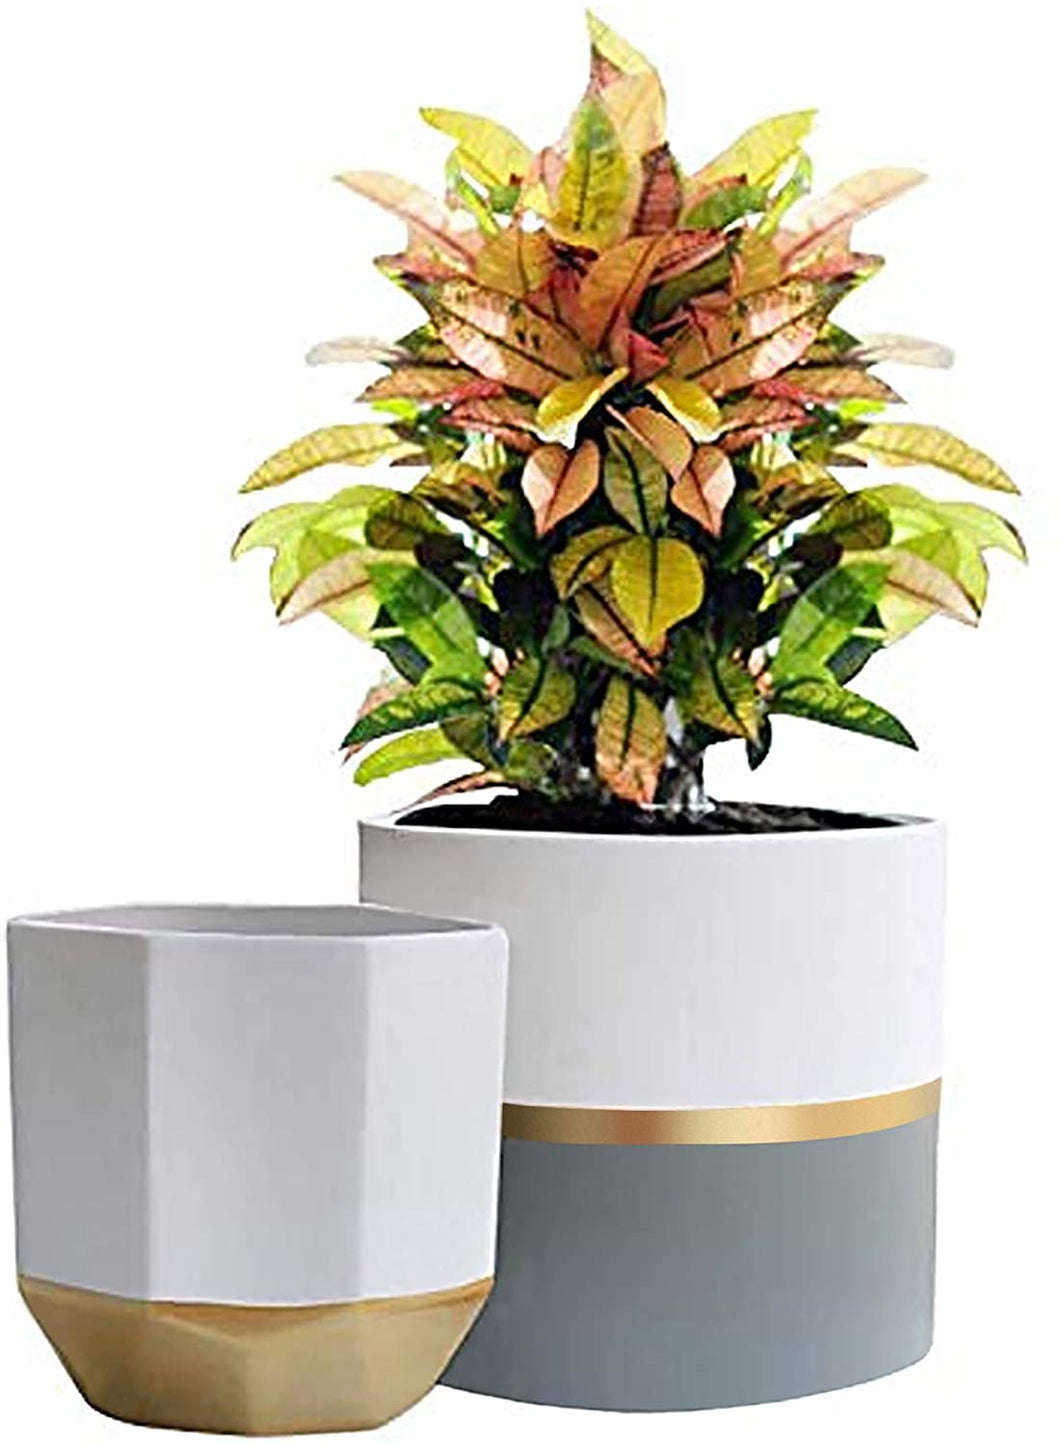 White Ceramic Flower Pot Garden Planters 6.7 + 5.4 Inch Indoor, Plant Containers with Gold and Grey Detailing